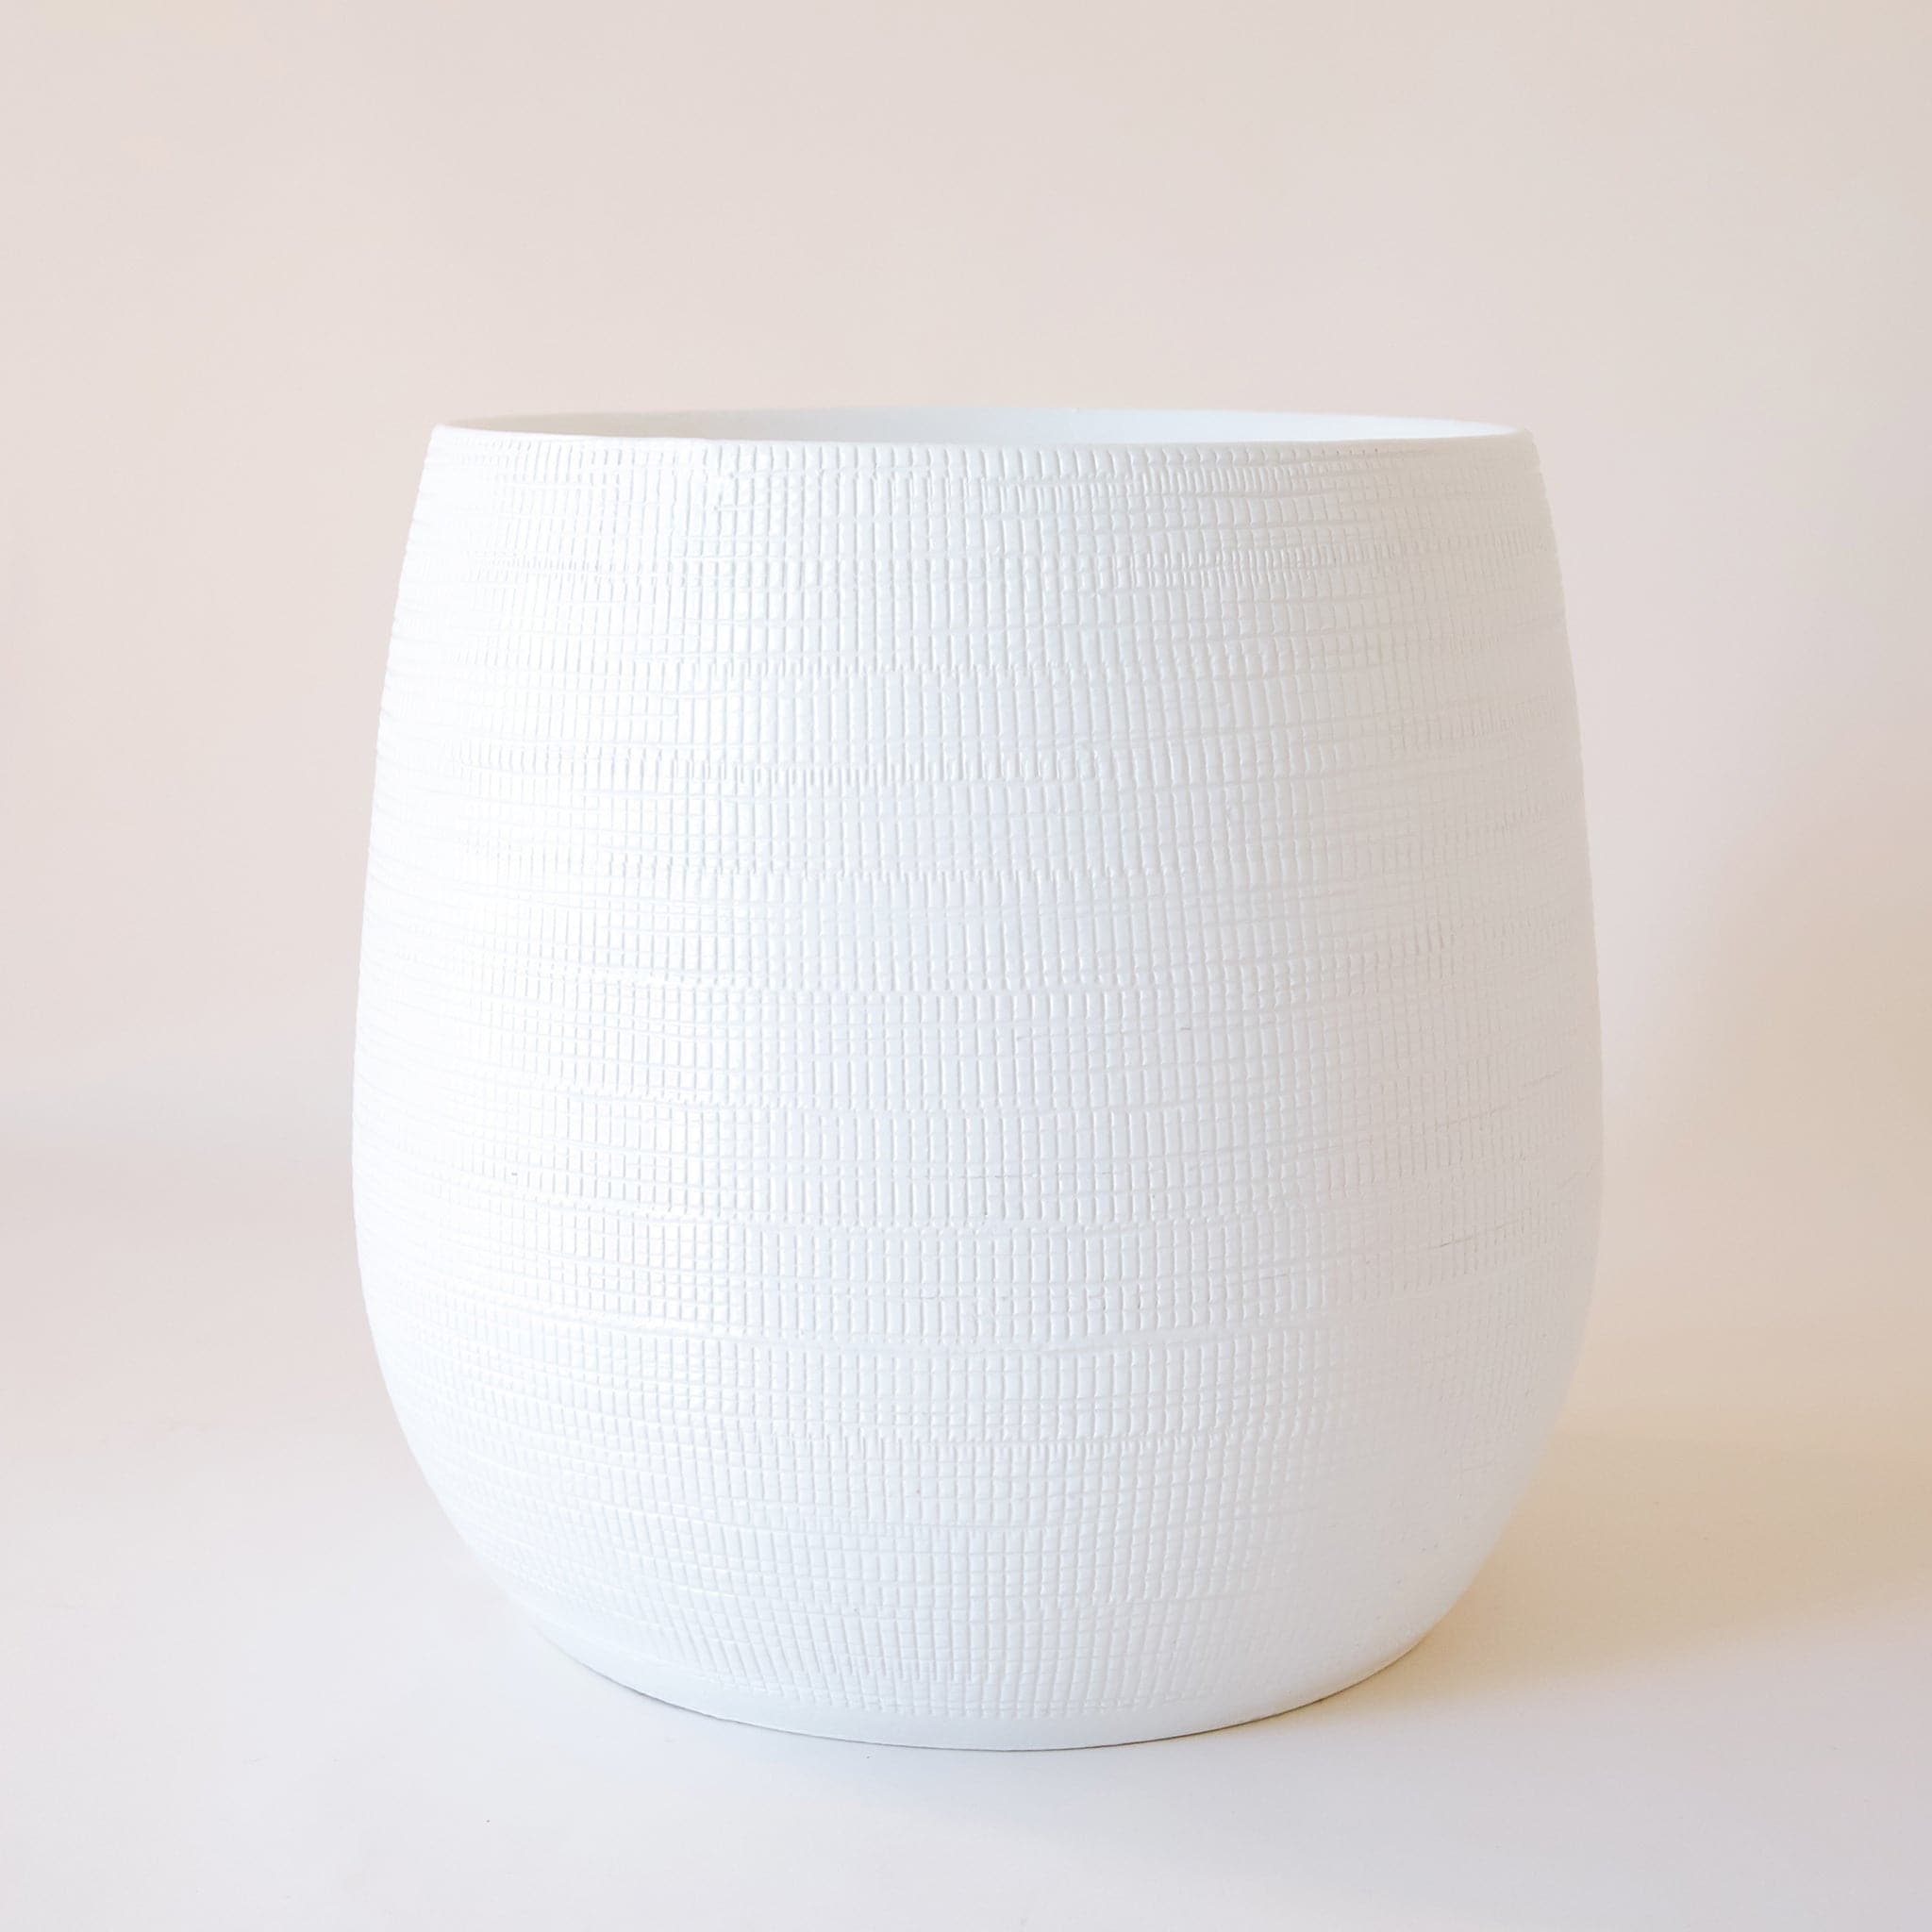 On a cream background is a white rounded ceramic pot with a tiny rectangular texture all over.